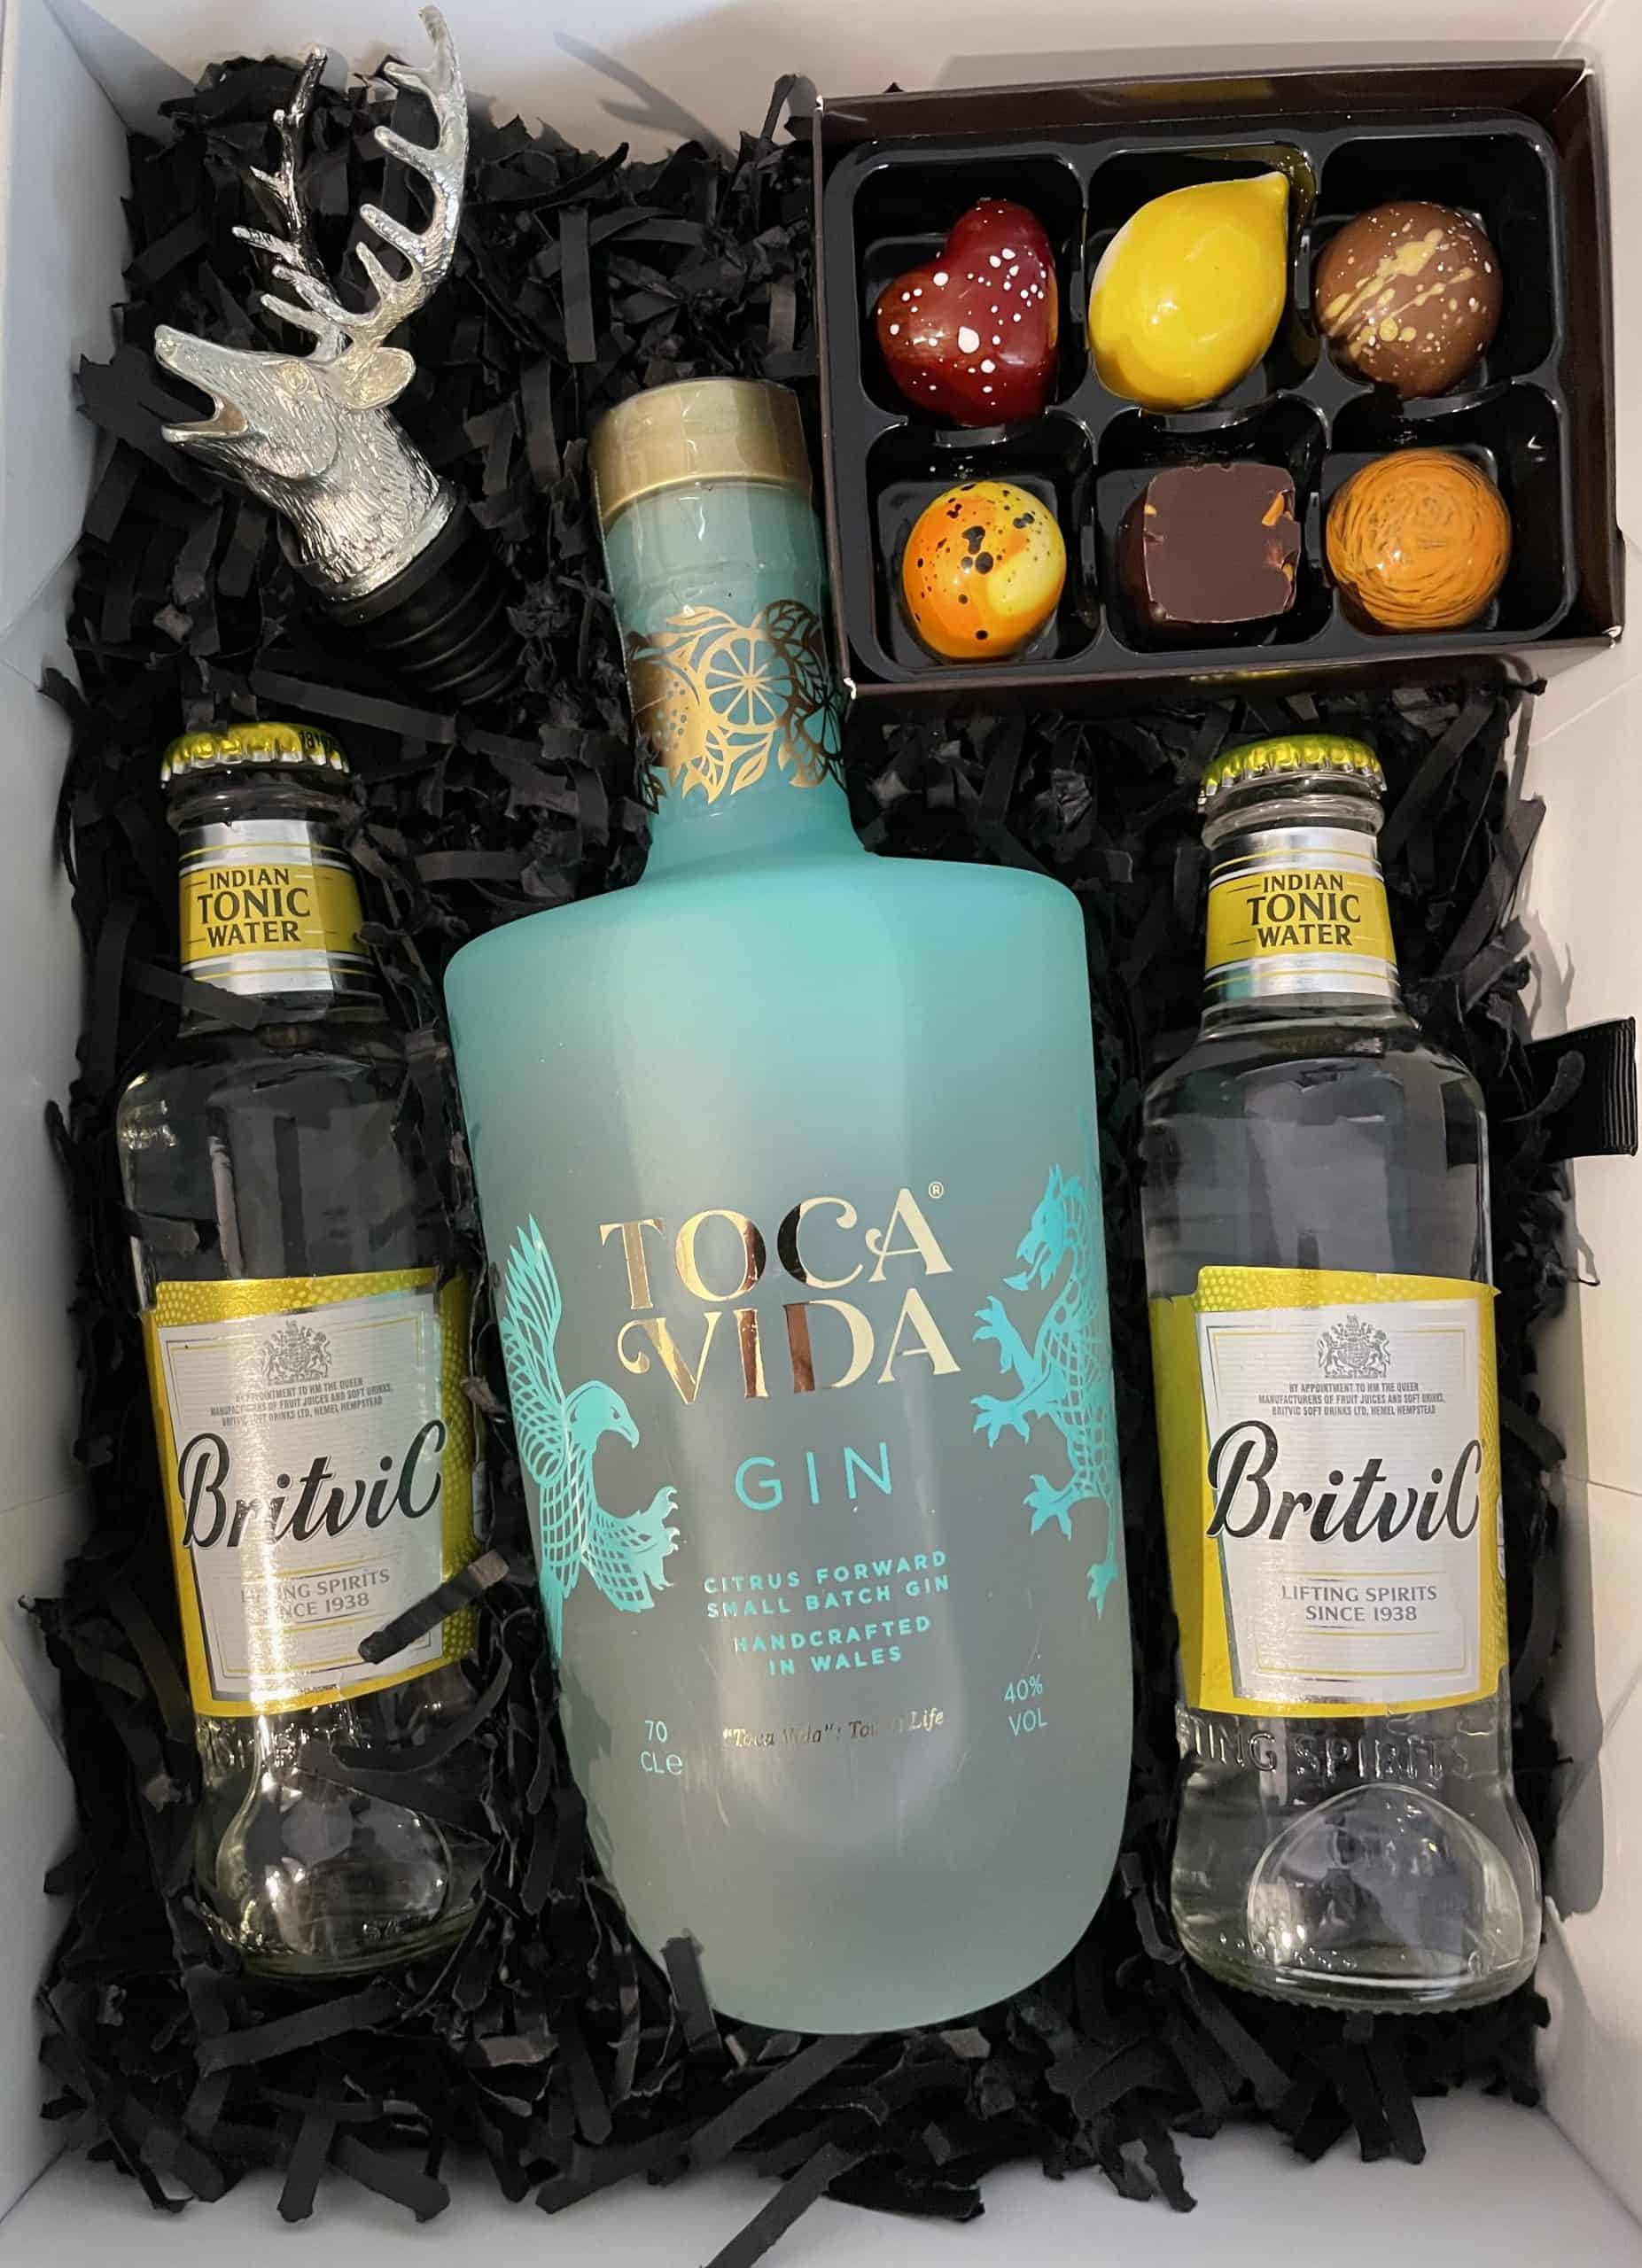 A Gift Box with a bottle of gin and chocolates.